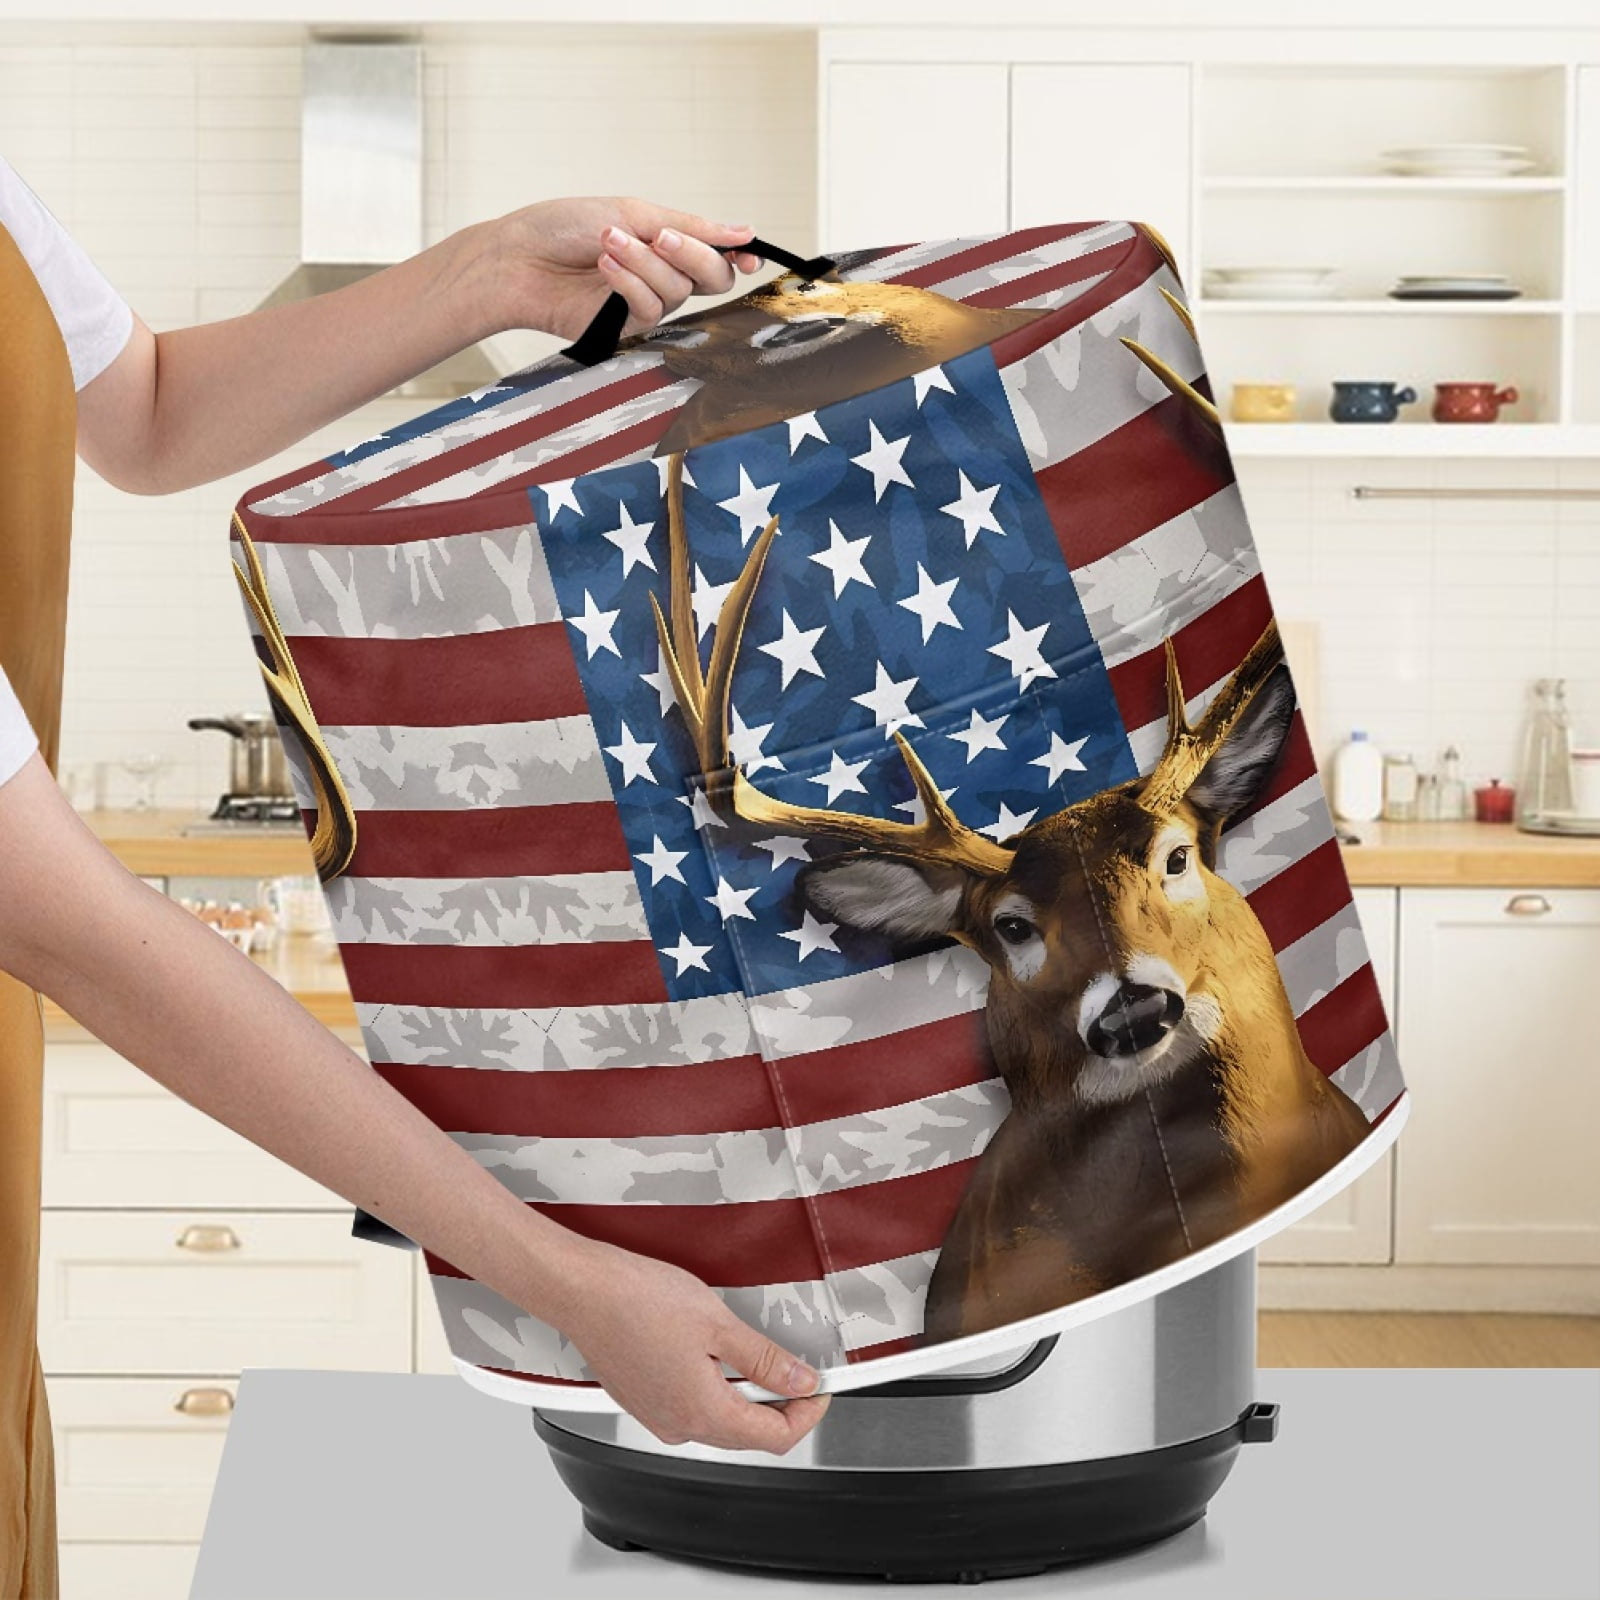 Jiueut Red Air Fryer Dust Cover with Pockets for Cooking